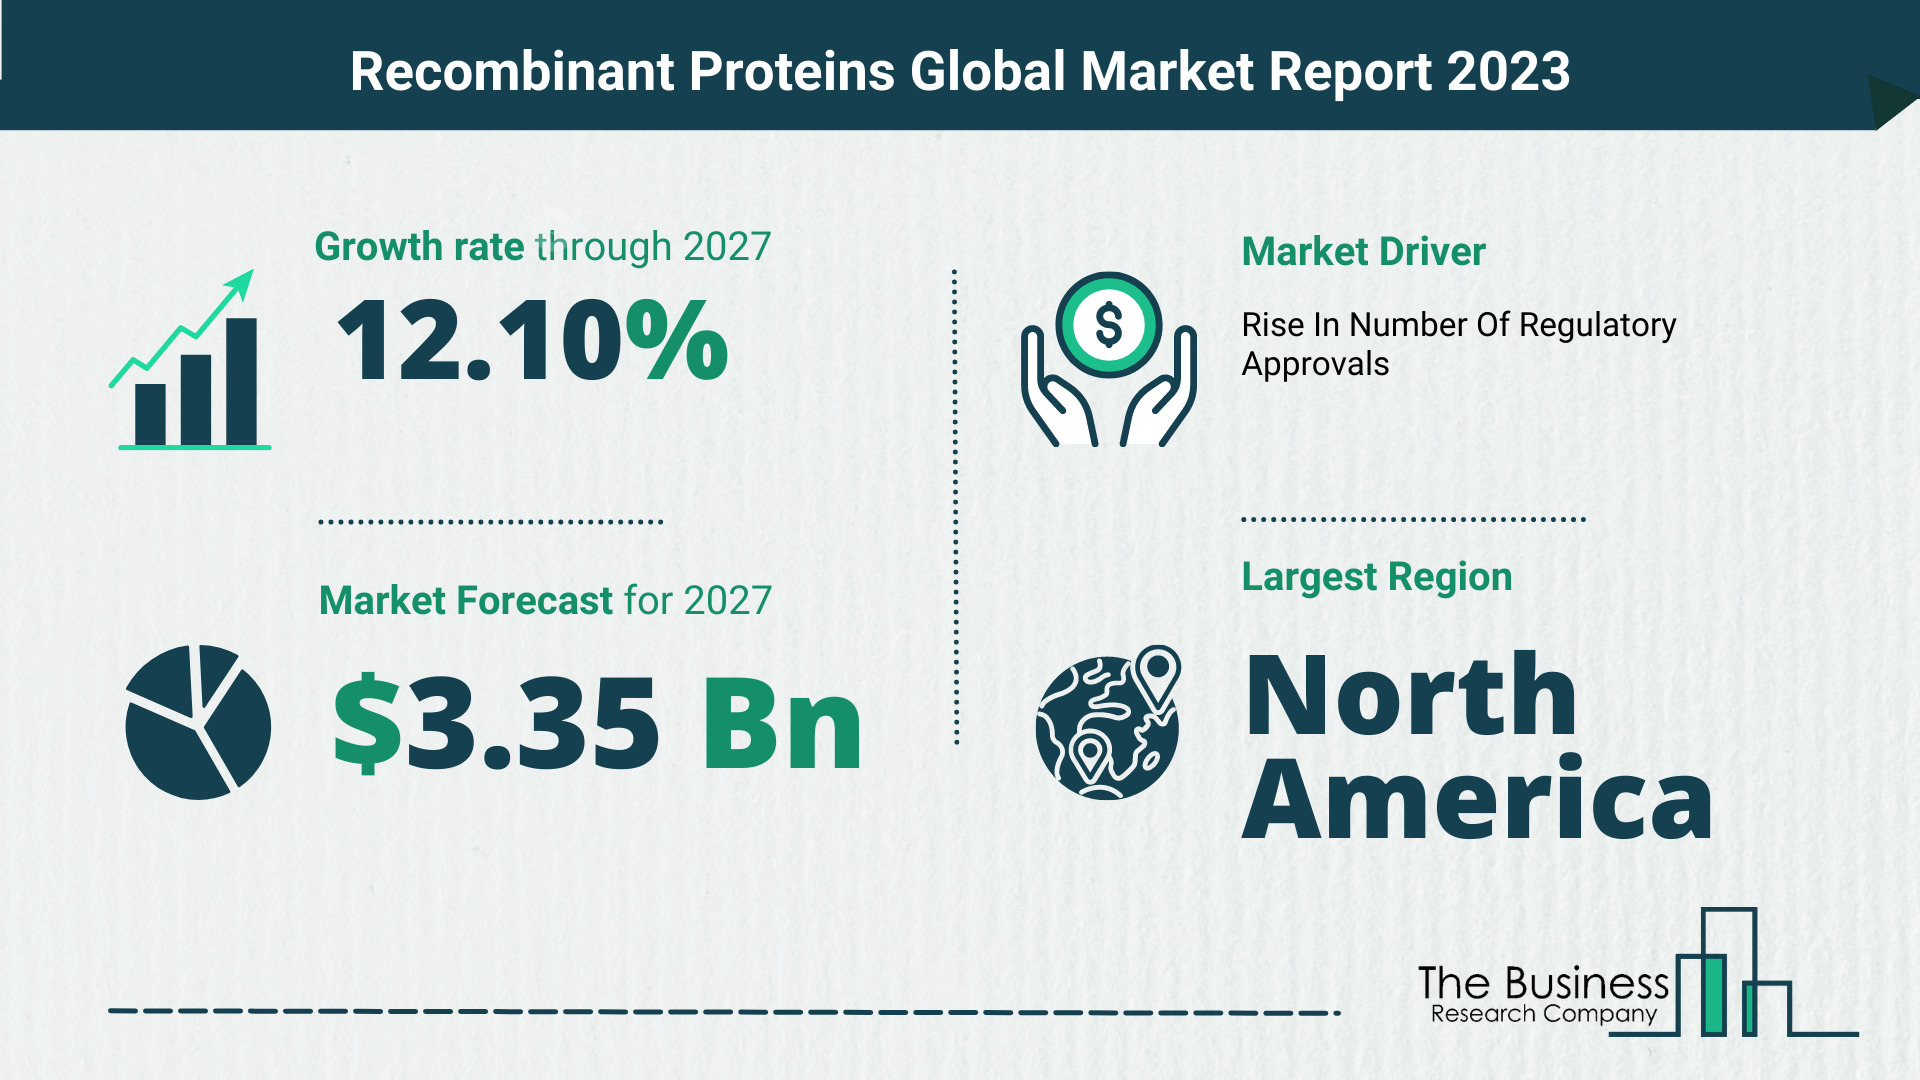 Global Recombinant Proteins Market Opportunities And Strategies 2023